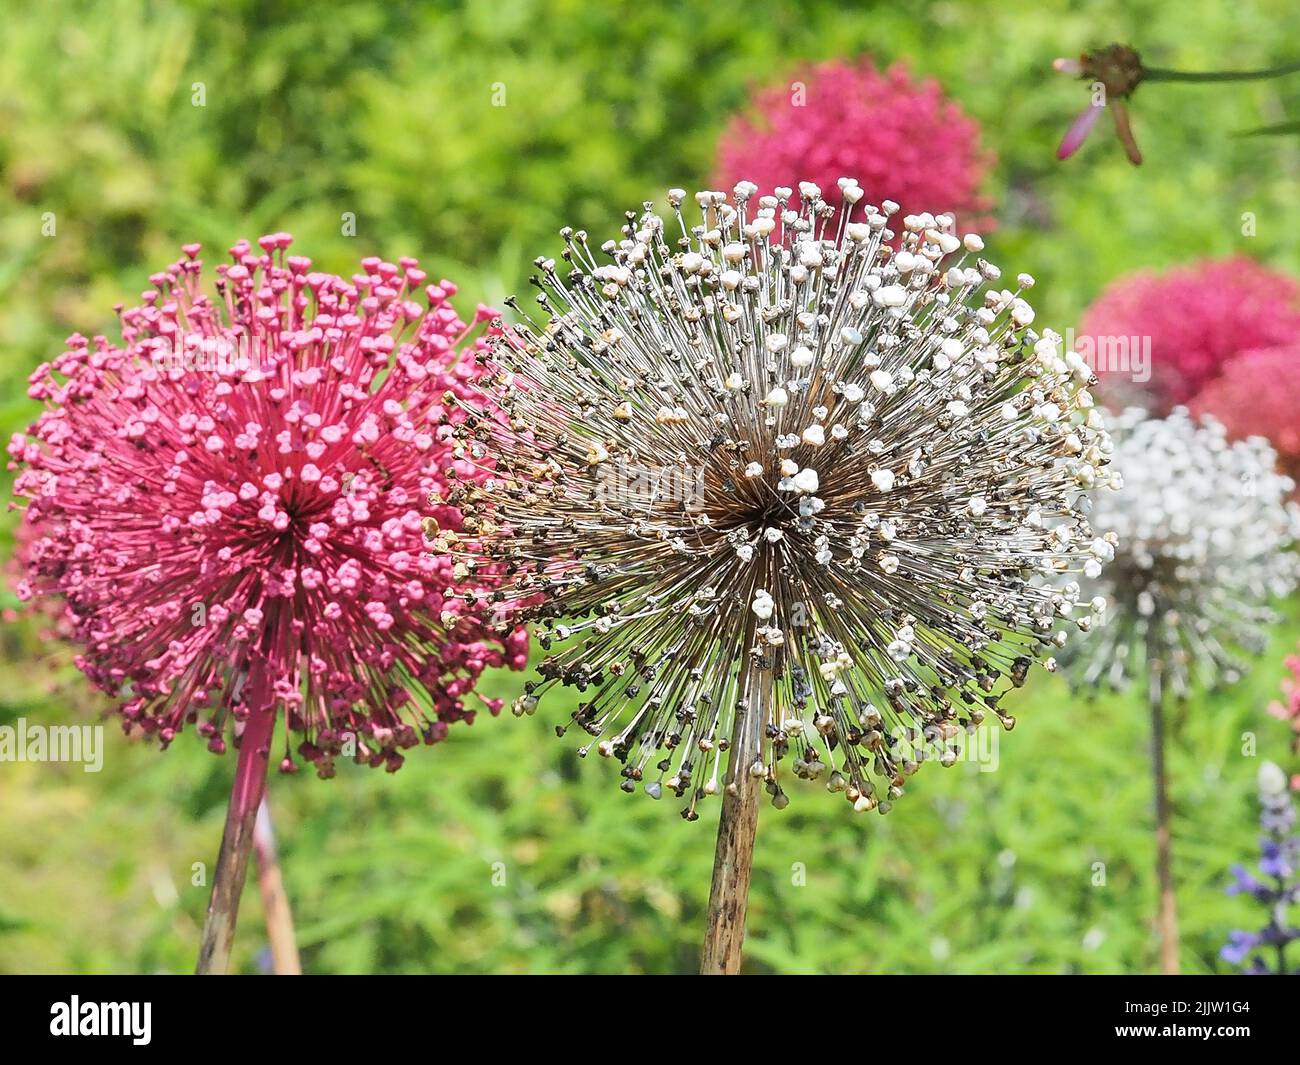 Tall stem White and lavender flowers with spiky round blossoms Stock Photo